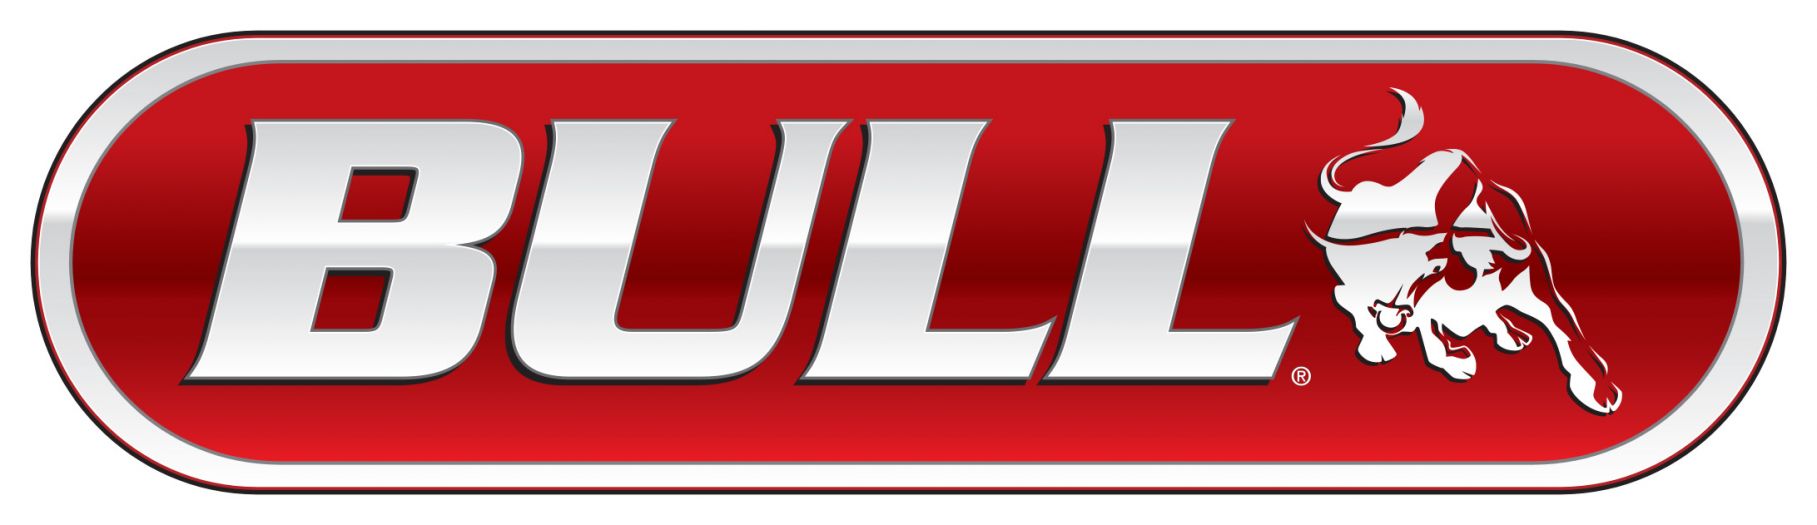 Bull outdoor products Logo